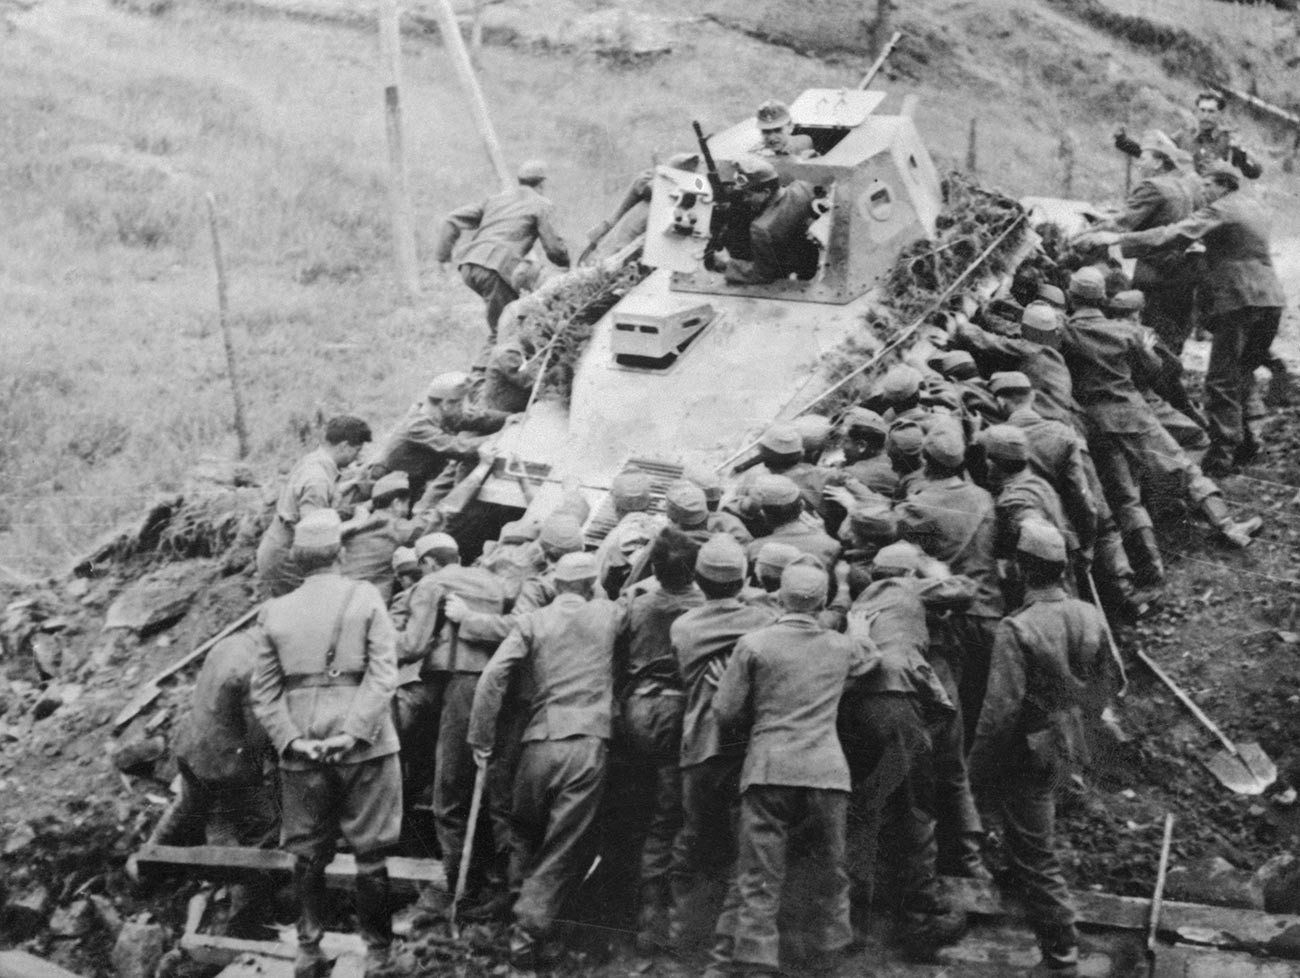 Over 50 Hungarian soldiers are putting their shoulders to the tractor wheels in an effort to recover this disabled Soviet tank.